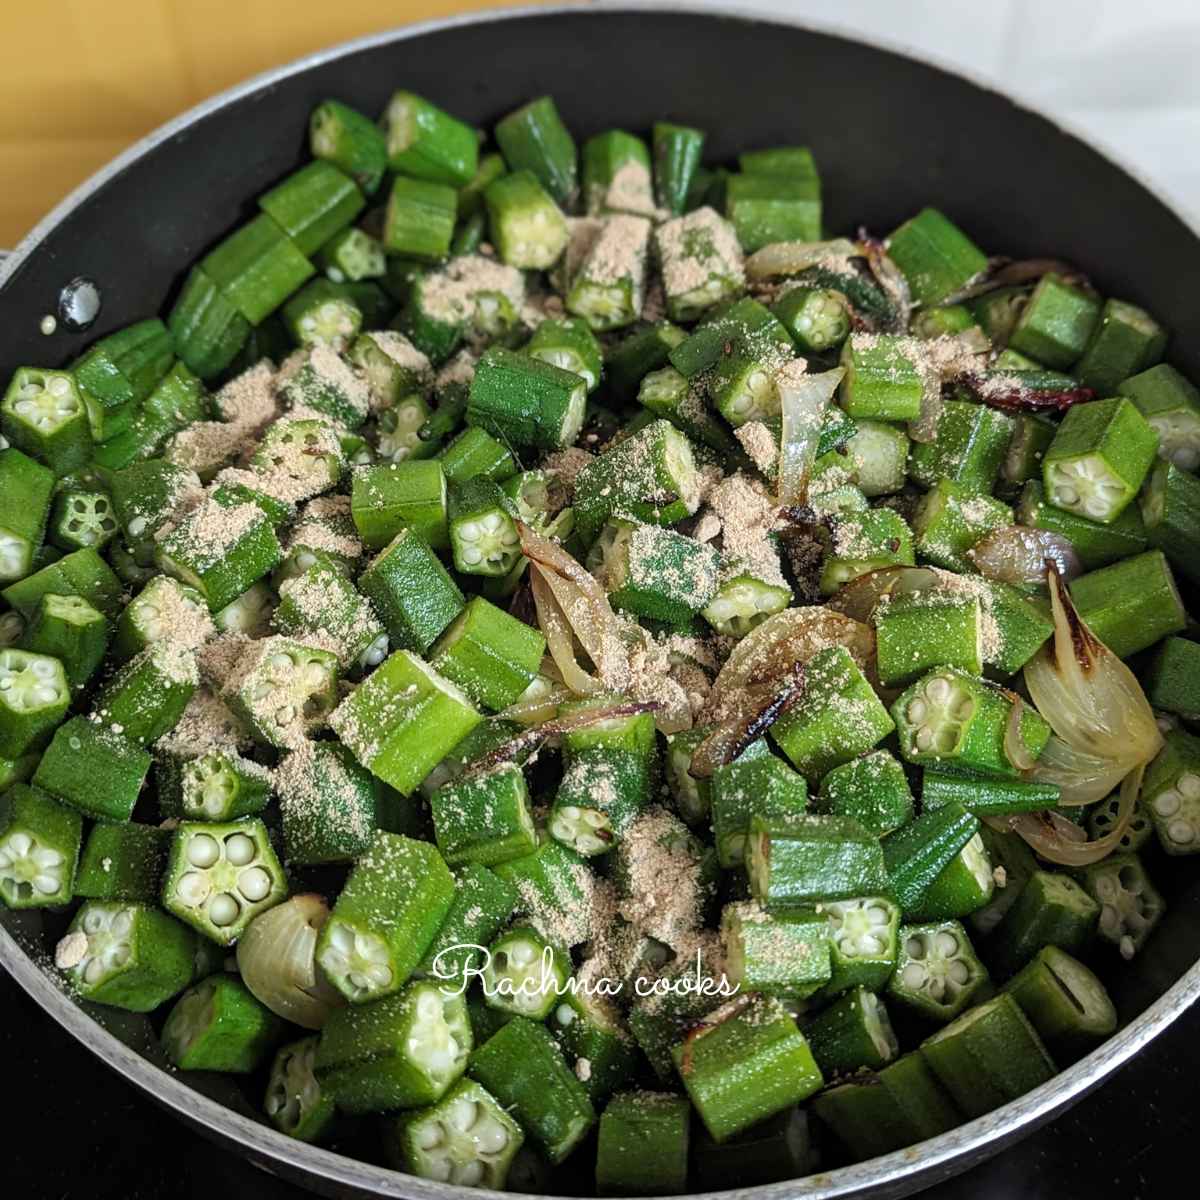 Bhhindi or okra cut into pieces mixed with the onion and amchur powder is added.